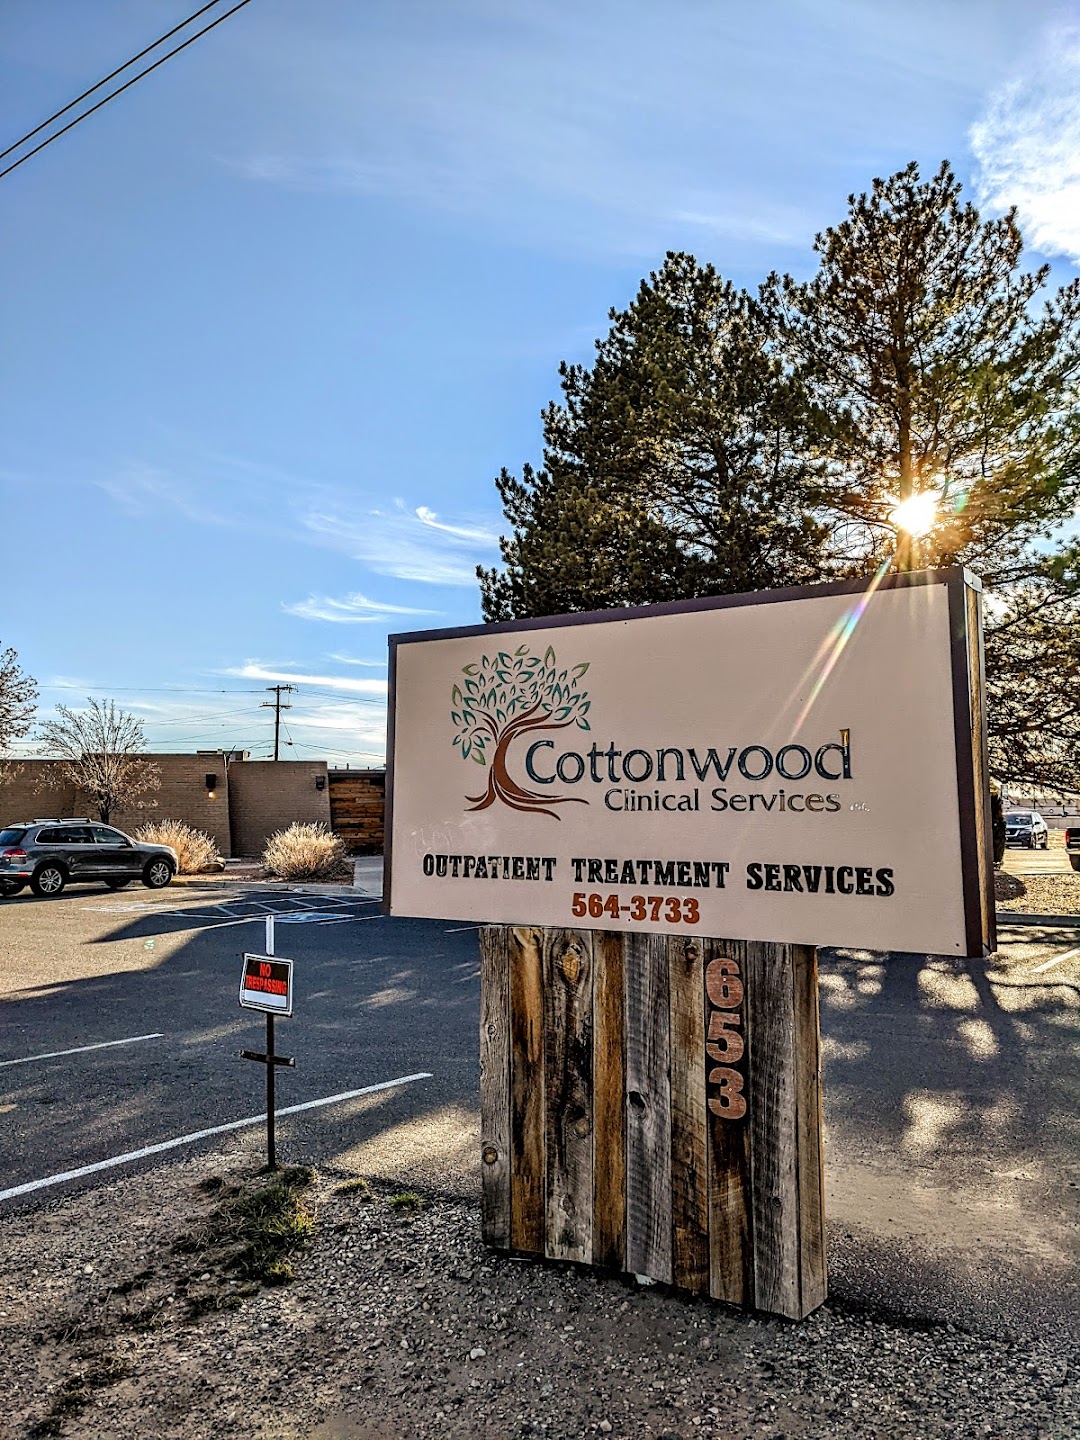 Cottonwood Clinical Services Inc